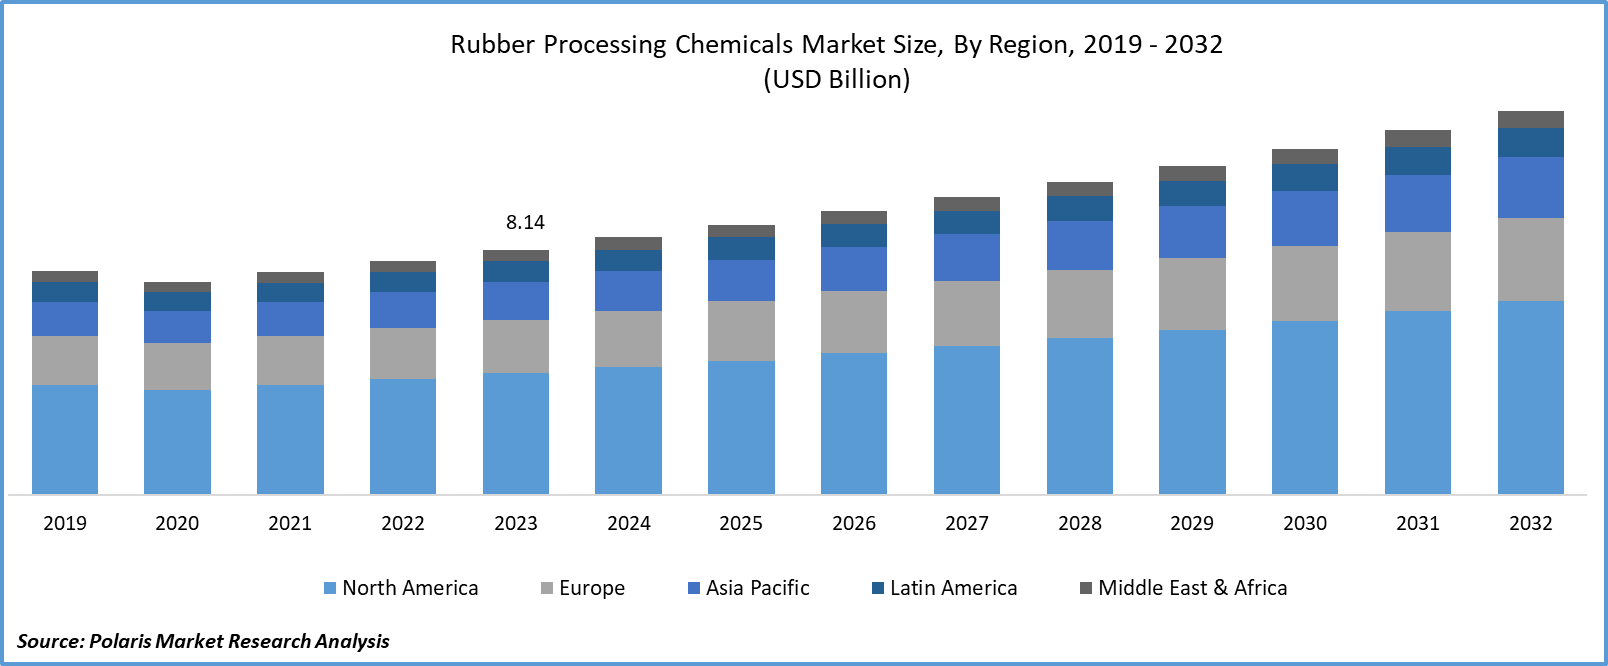 Rubber Processing Chemicals Market Size